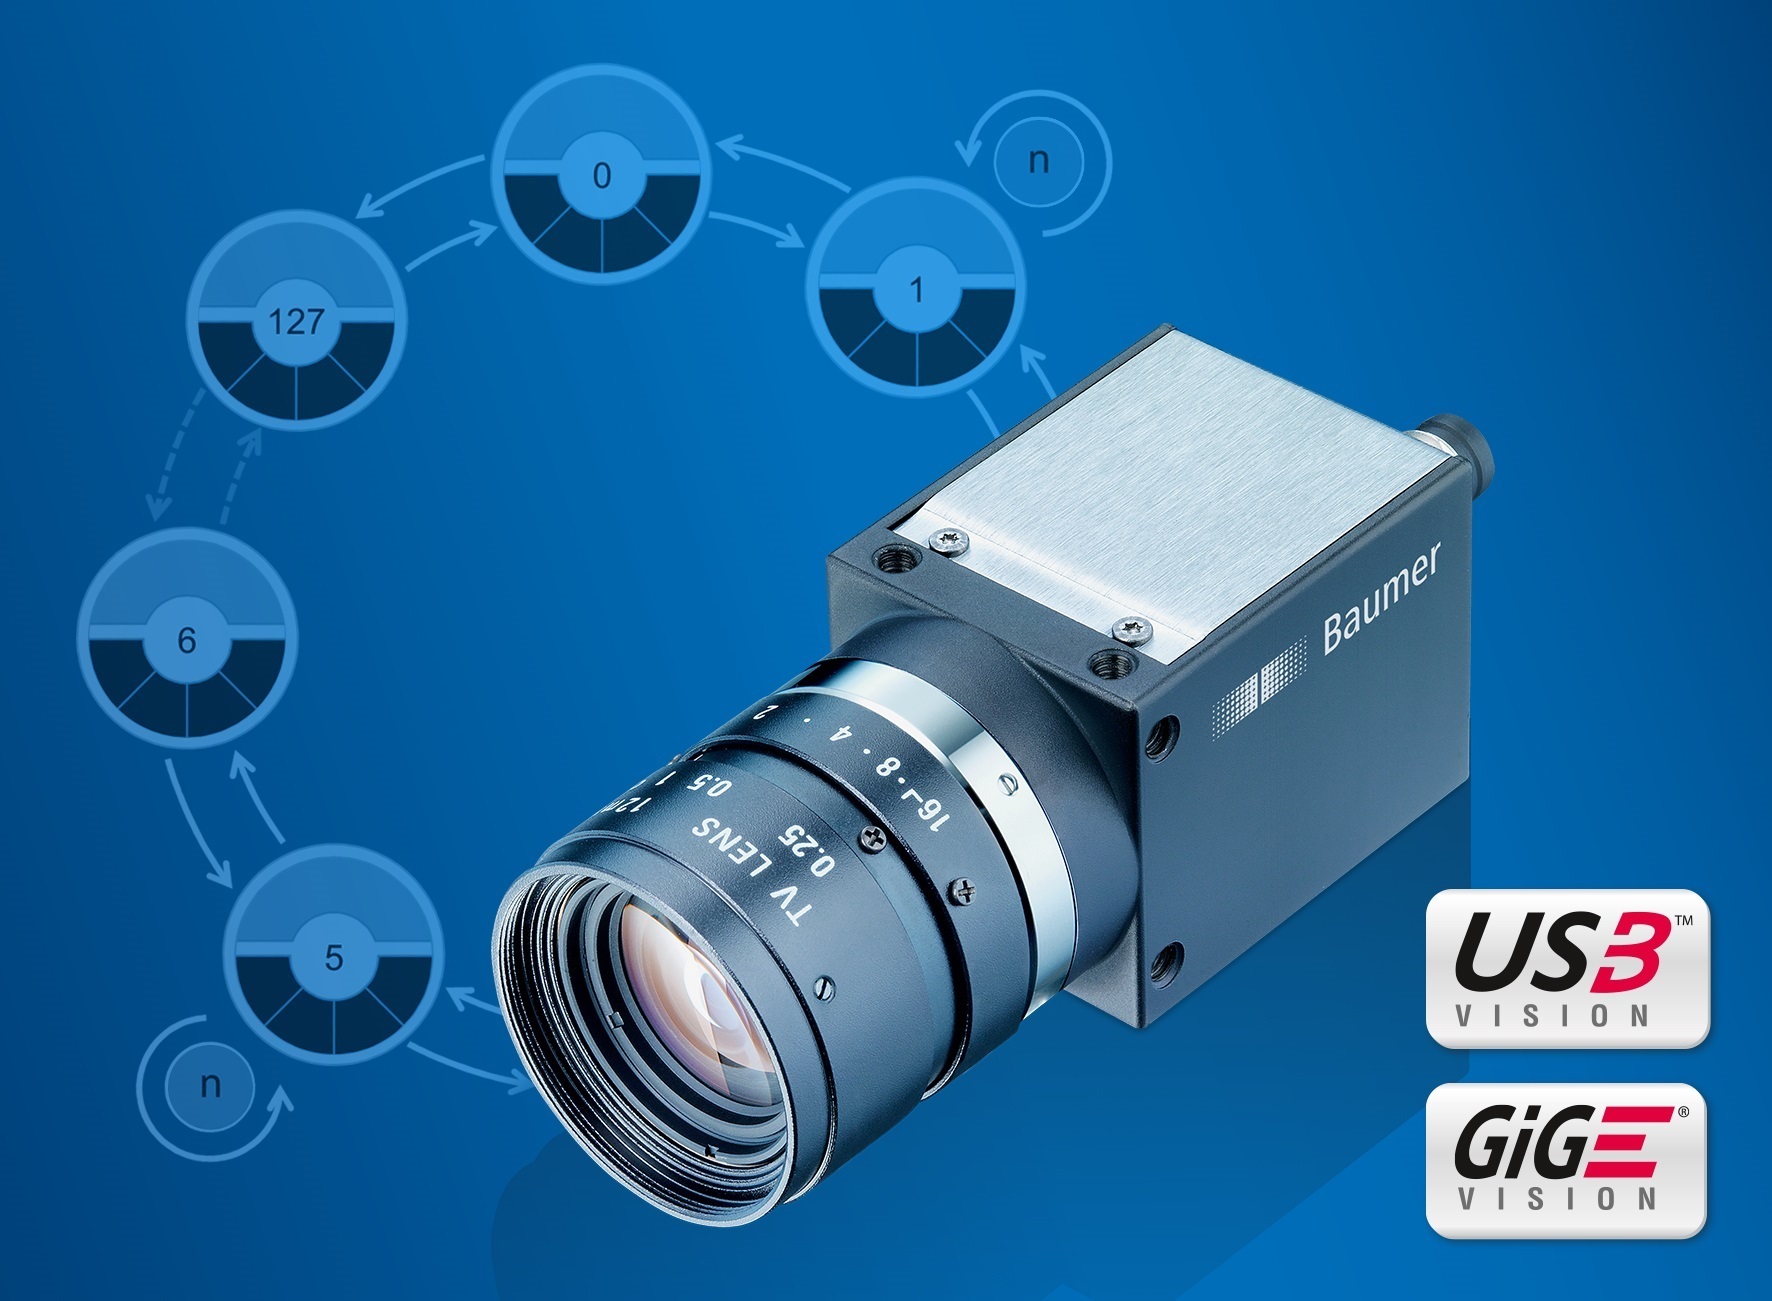 CX-series with up to 12 megapixel and Global Shutter CMOS sensors in compact 29 x 29 mm housing.